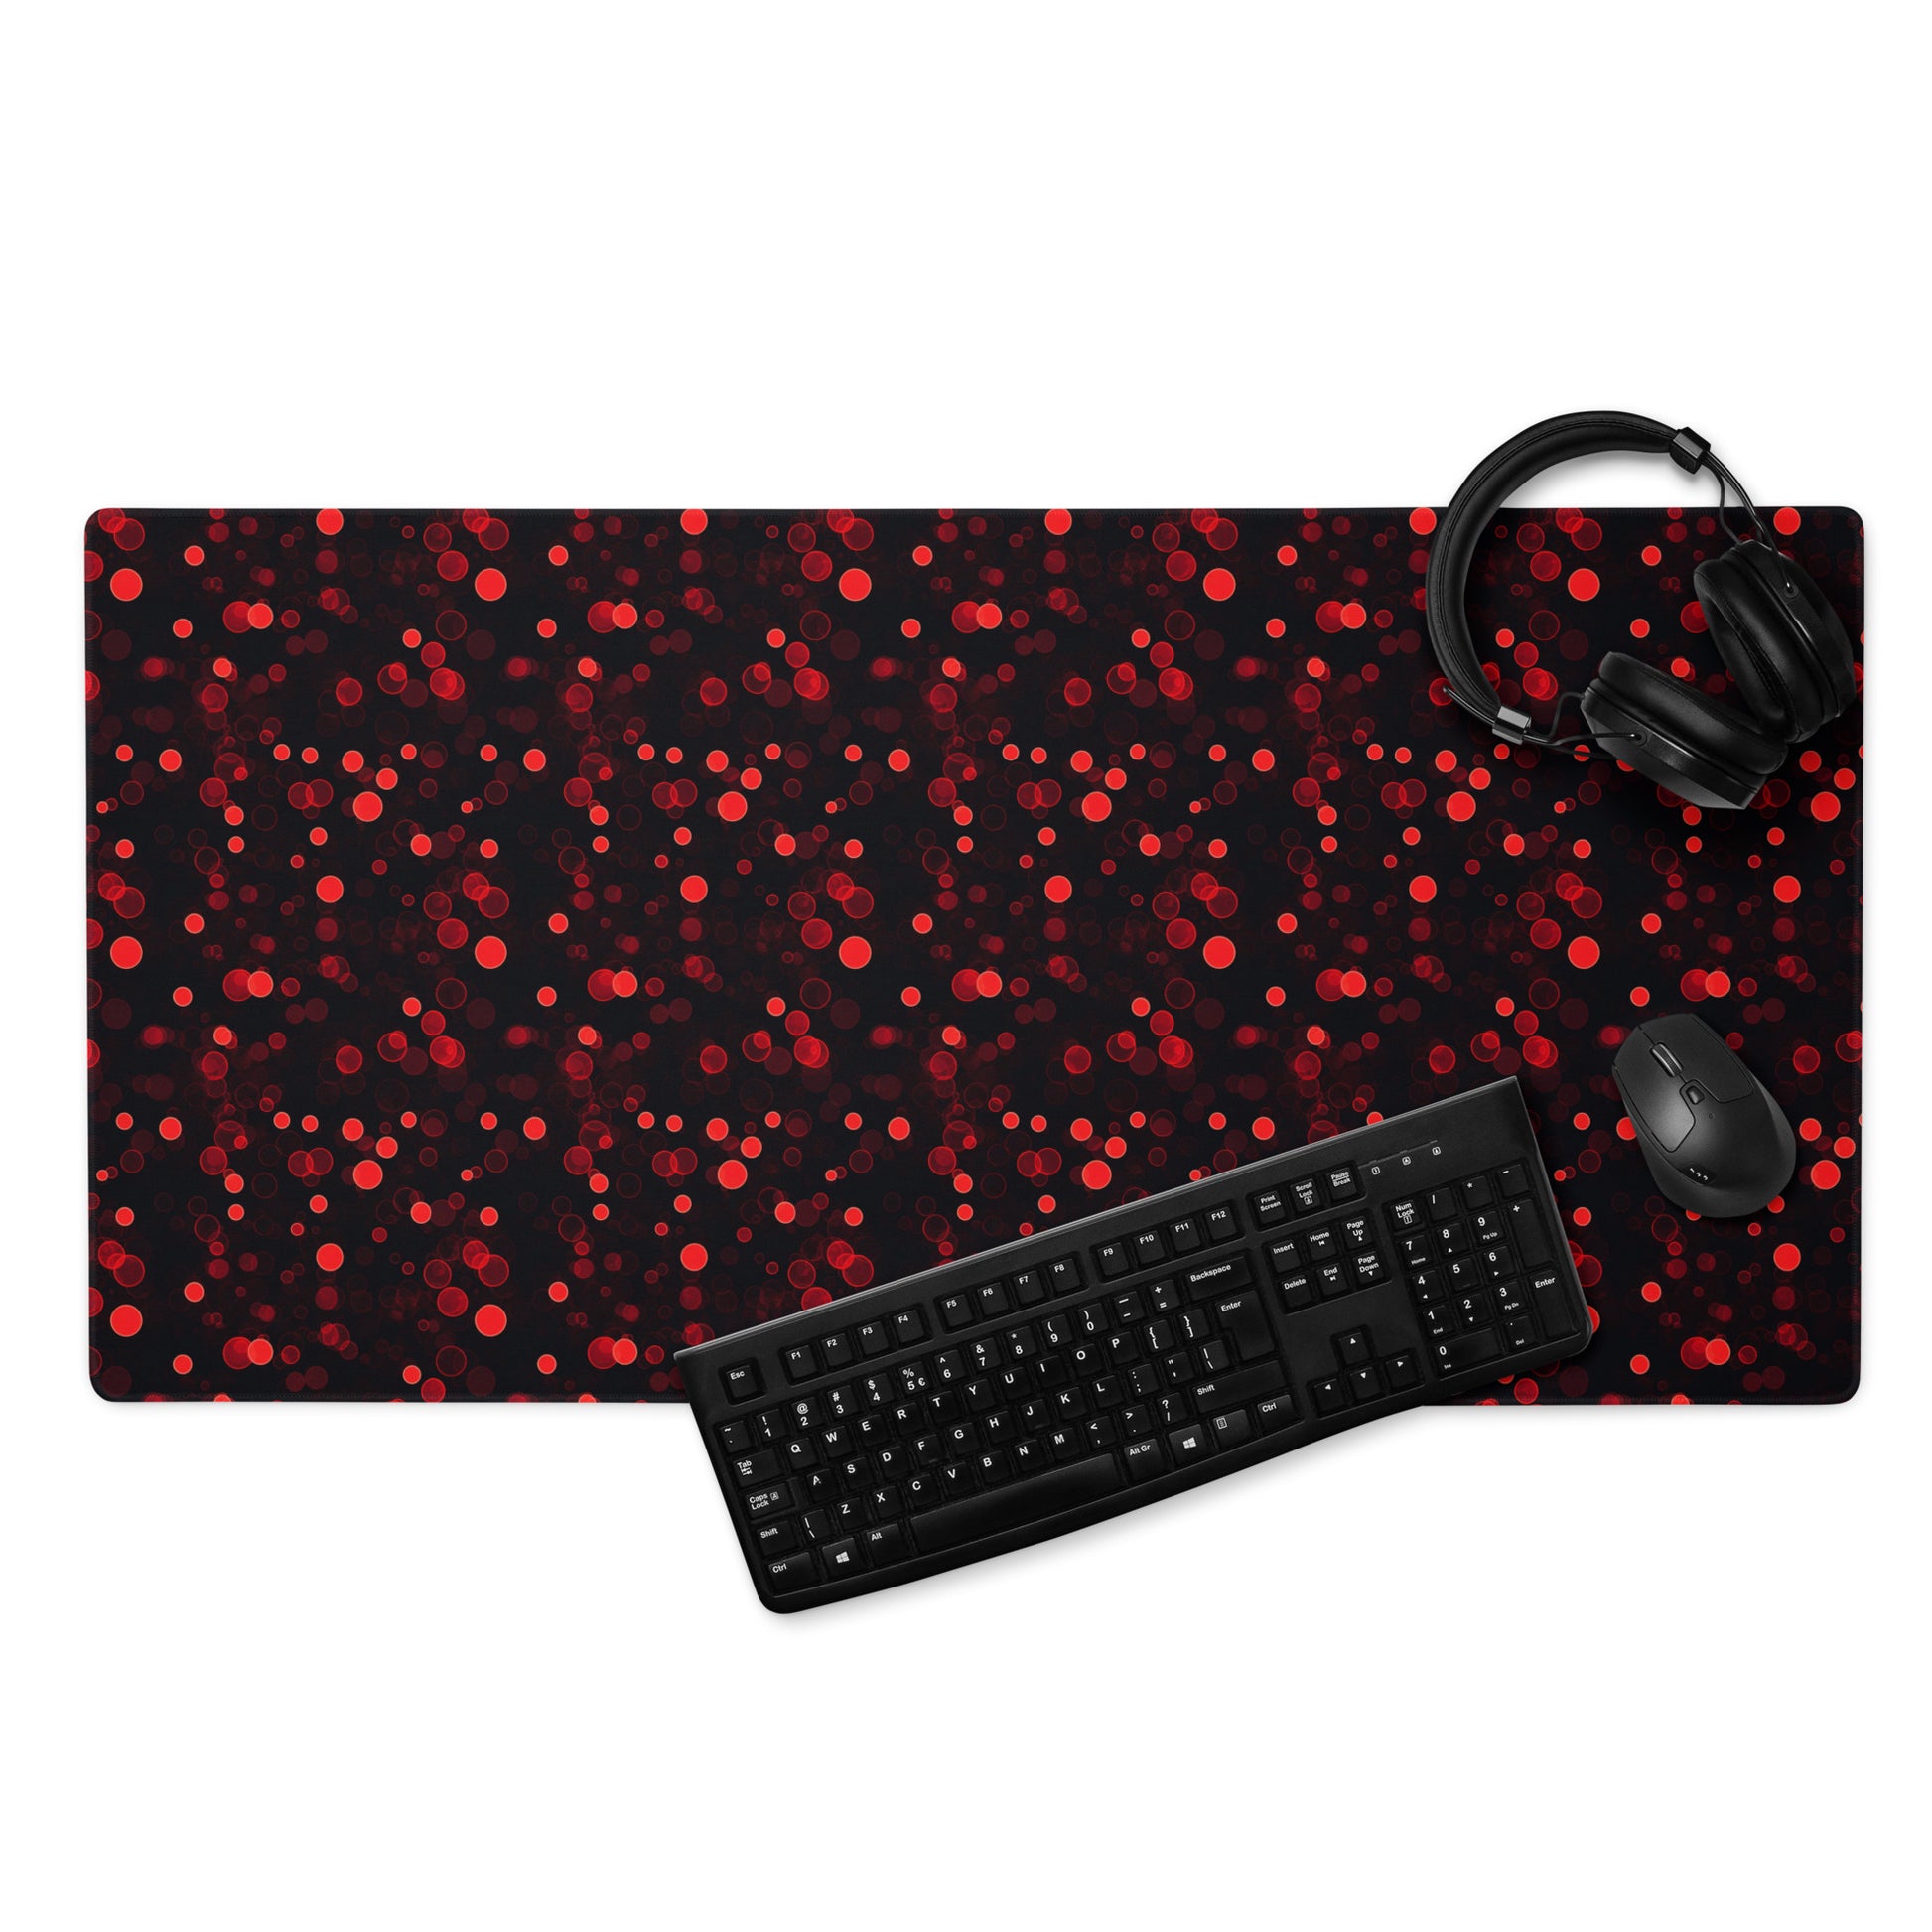 A 36" x 18" desk pad with red polka dots. With a keyboard, mouse, and headphones sitting on it.